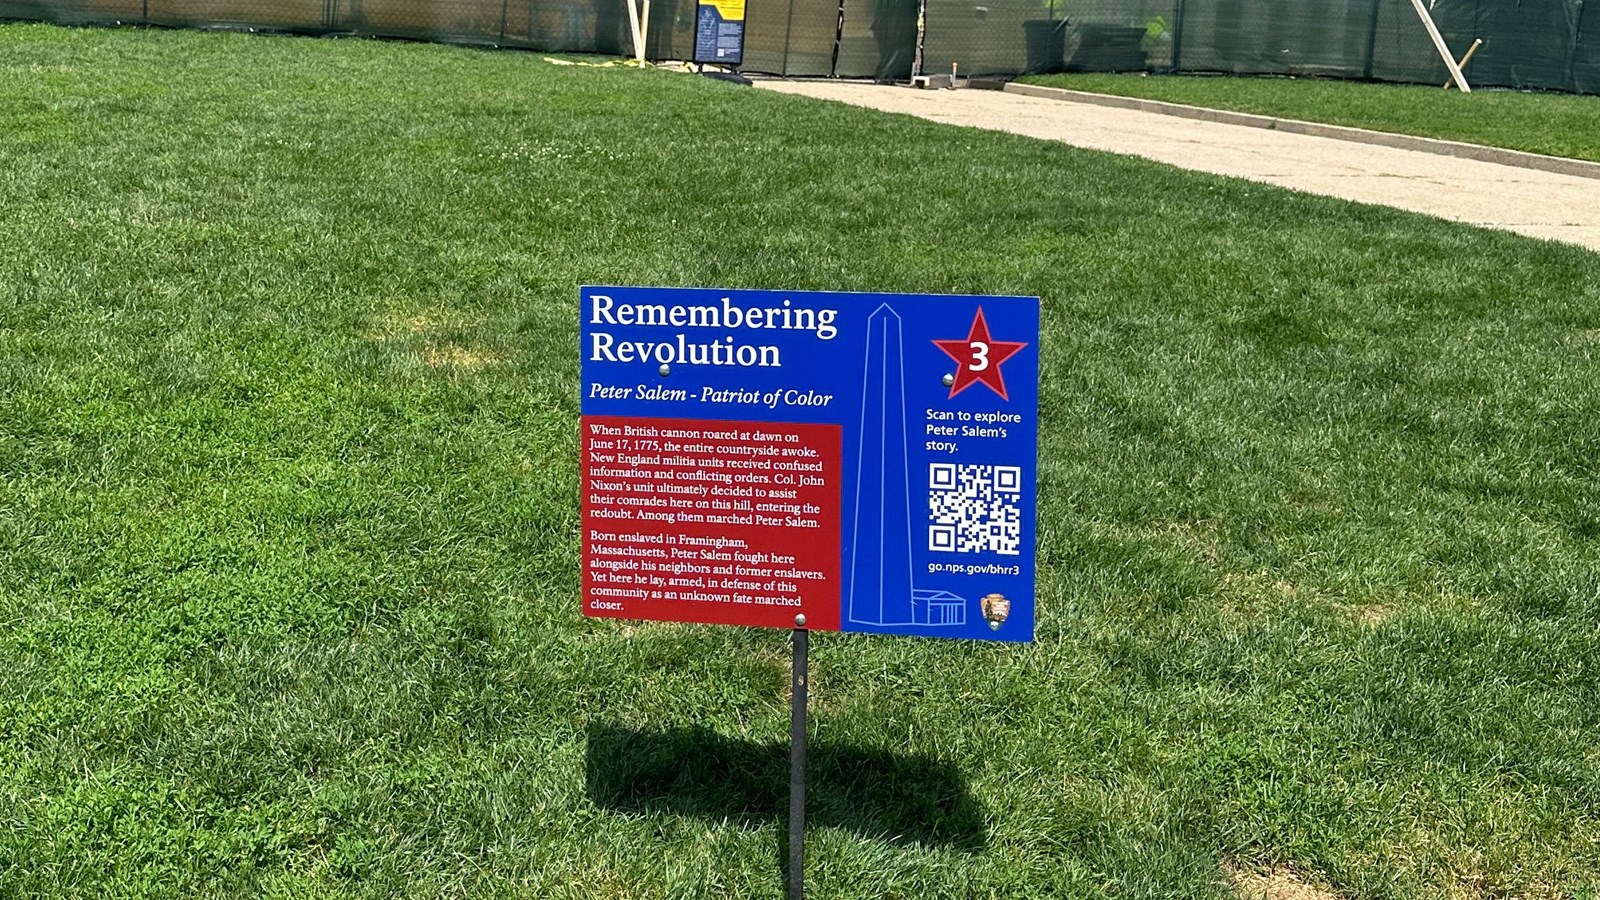 Red and blue wayside next to southeast corner marker on lawn.